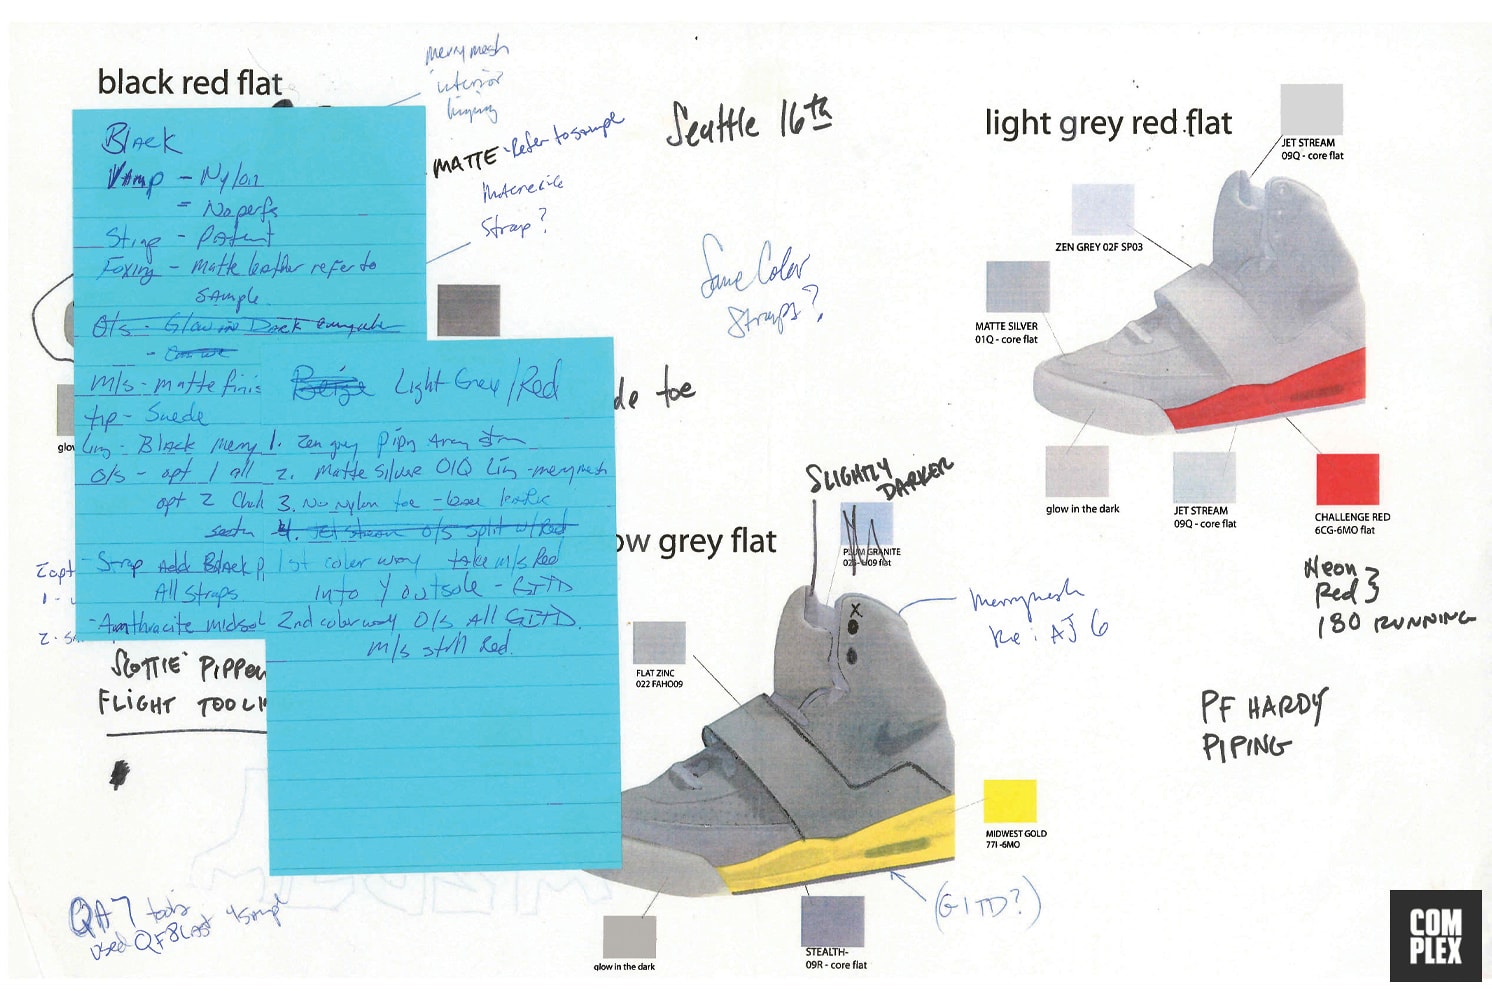 Complex April/May 2009 Nike Air Yeezy Sketches